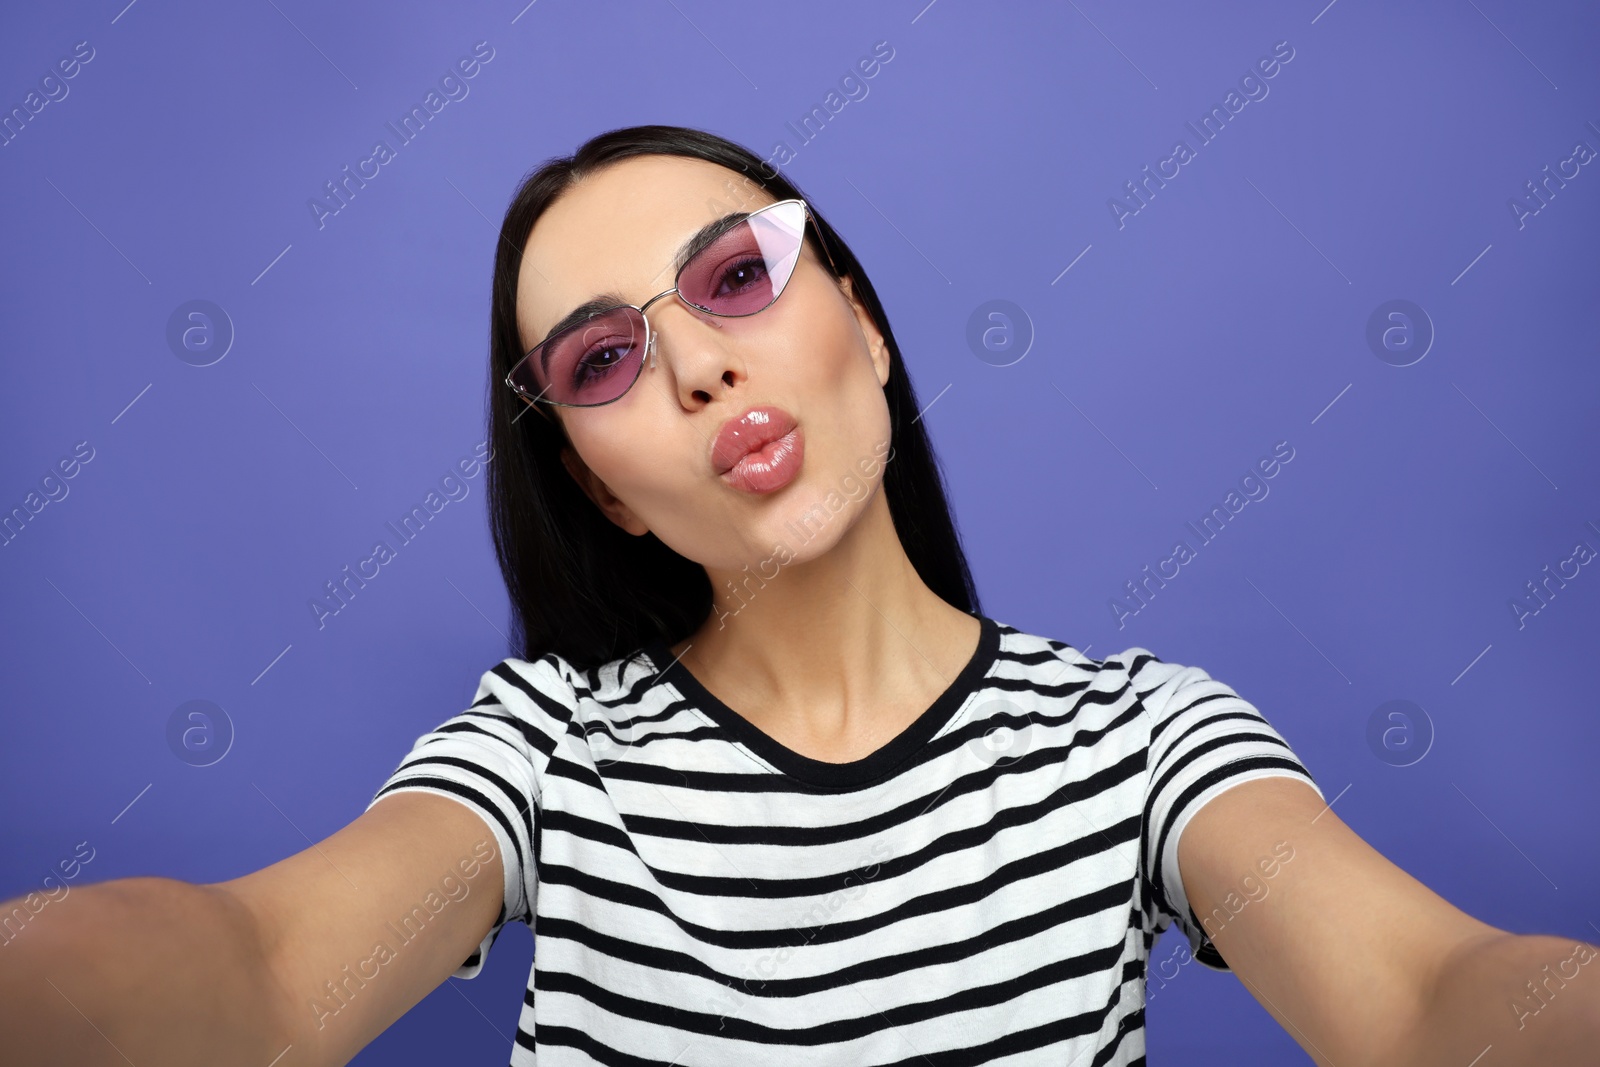 Photo of Beautiful young woman in stylish sunglasses taking selfie while blowing kiss on purple background